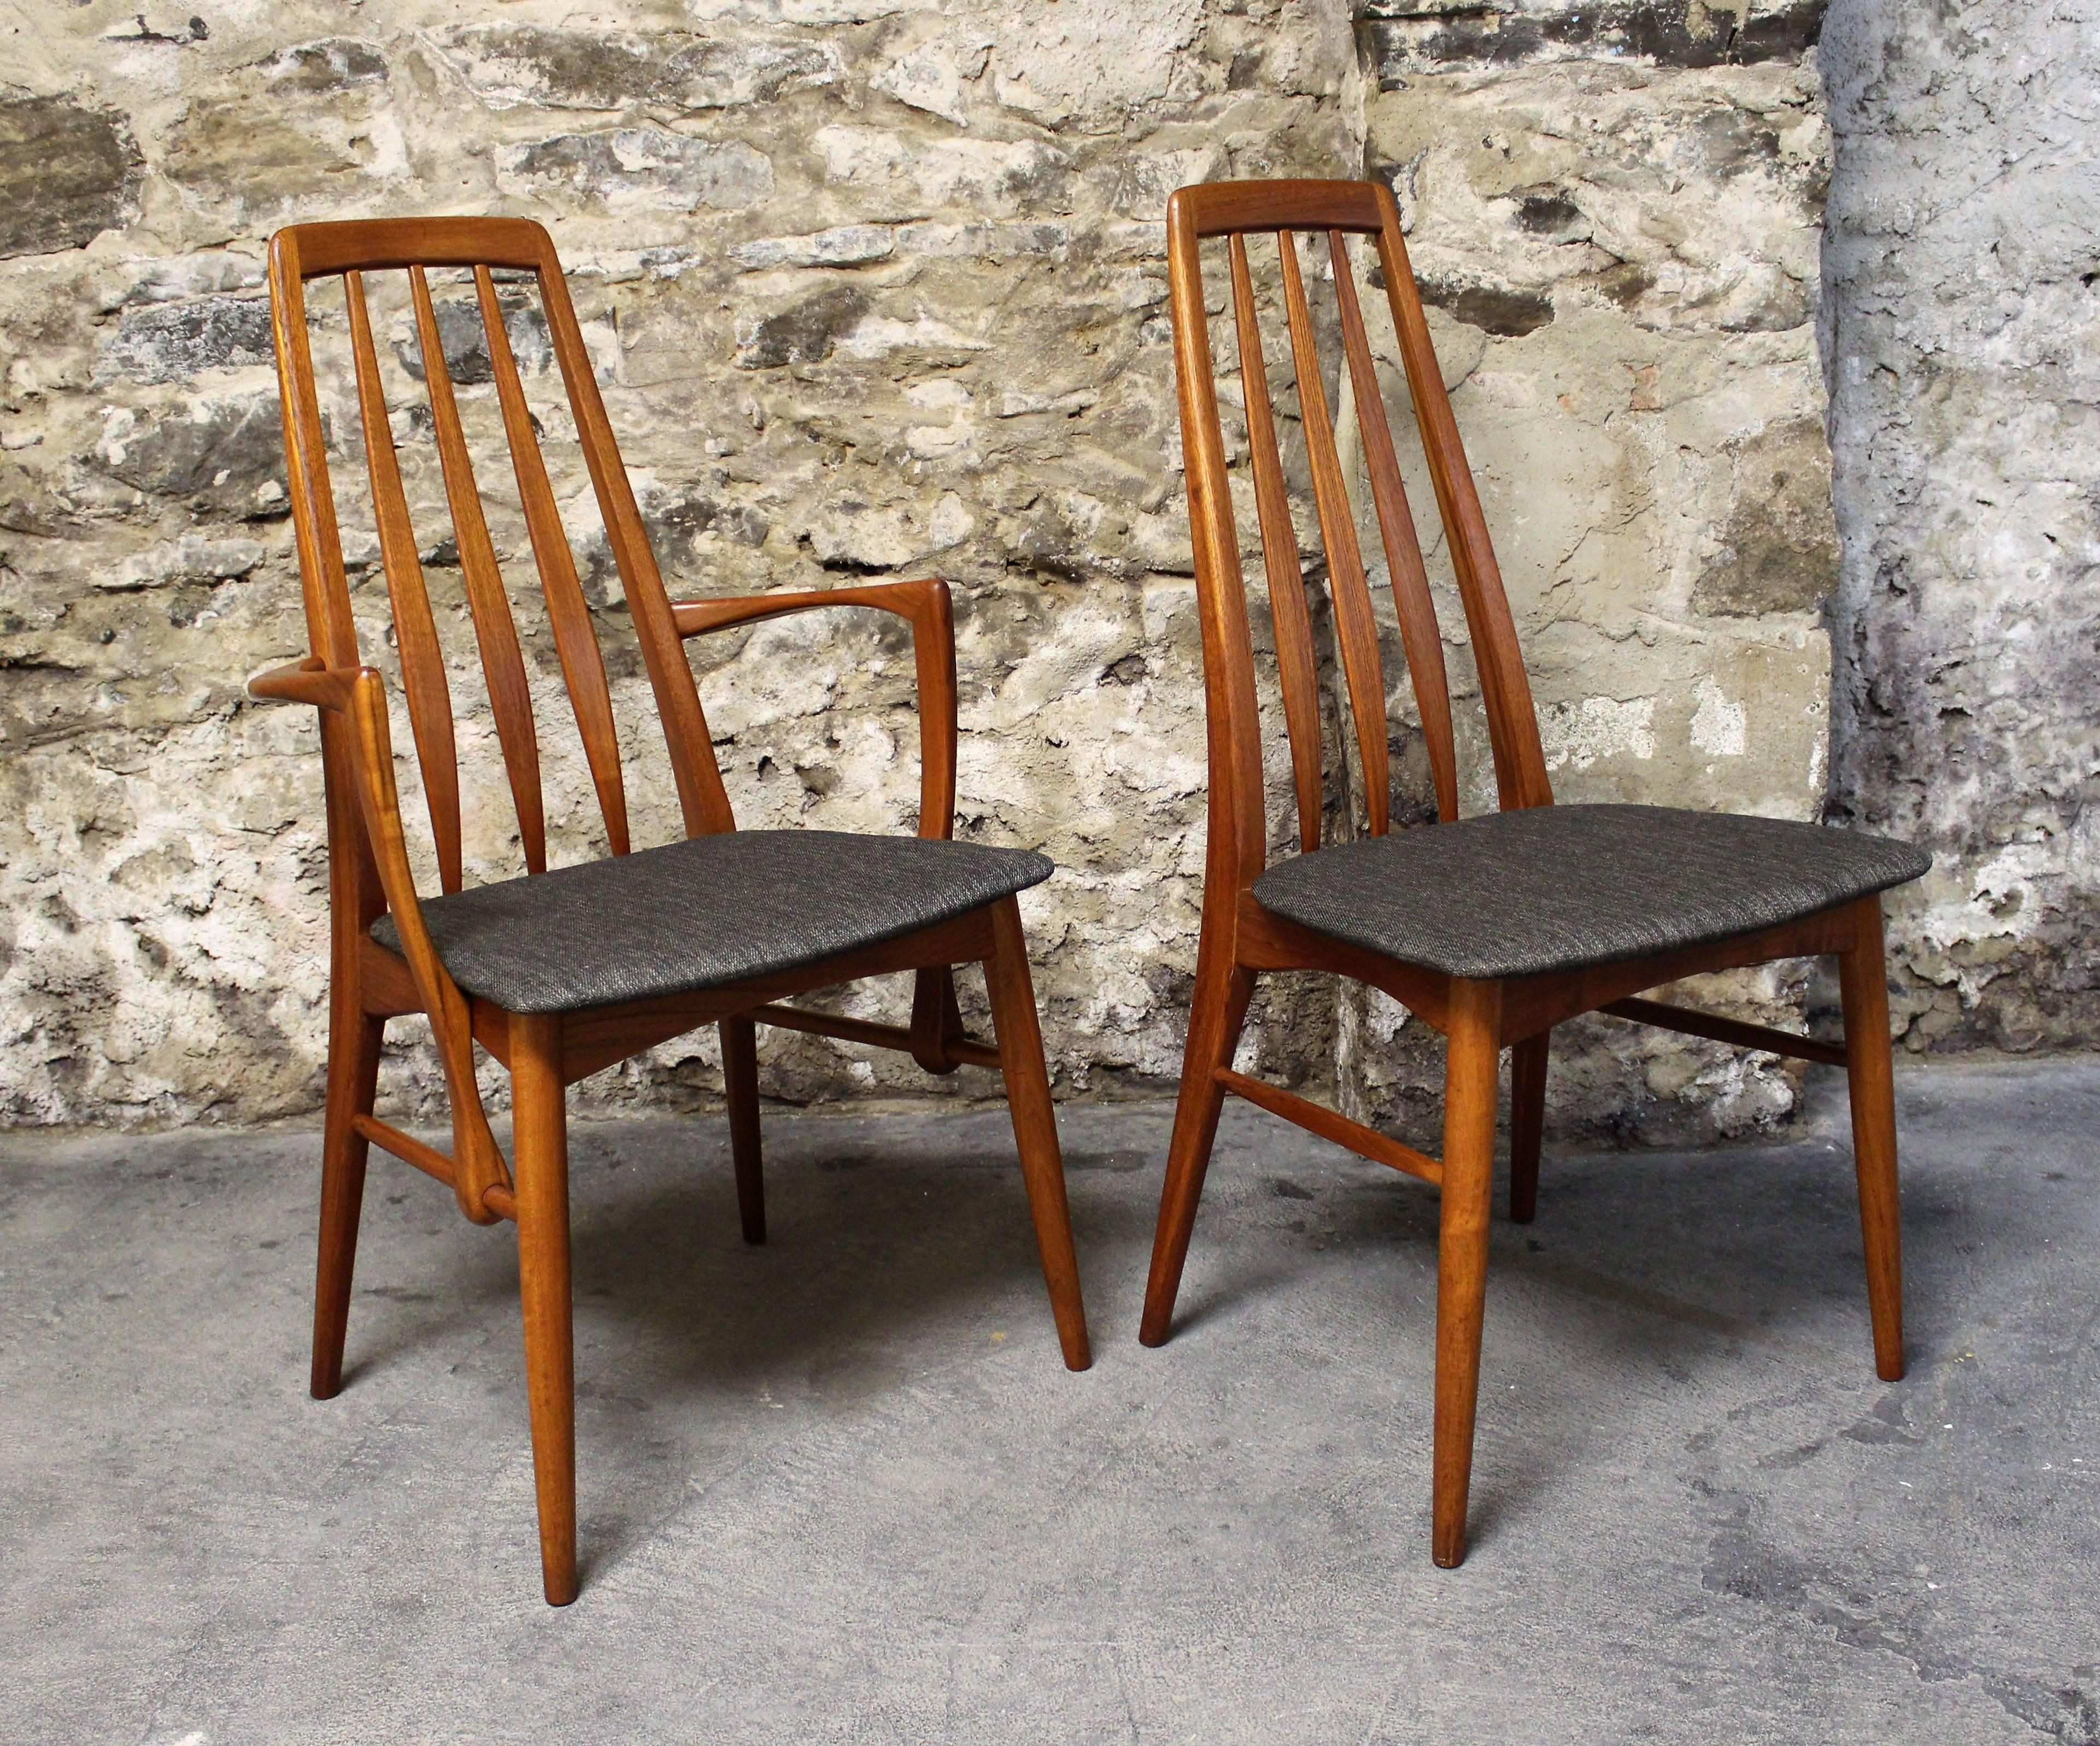 Set of six Danish teak "Eva" dining chairs by Niels Koefoed for Koefoed Hornslet newly upholstered in black fabric. Includes two armchairs.
2 Armchair measurements:
37.75" high x 21" wide x 20" deep
4 other chairs